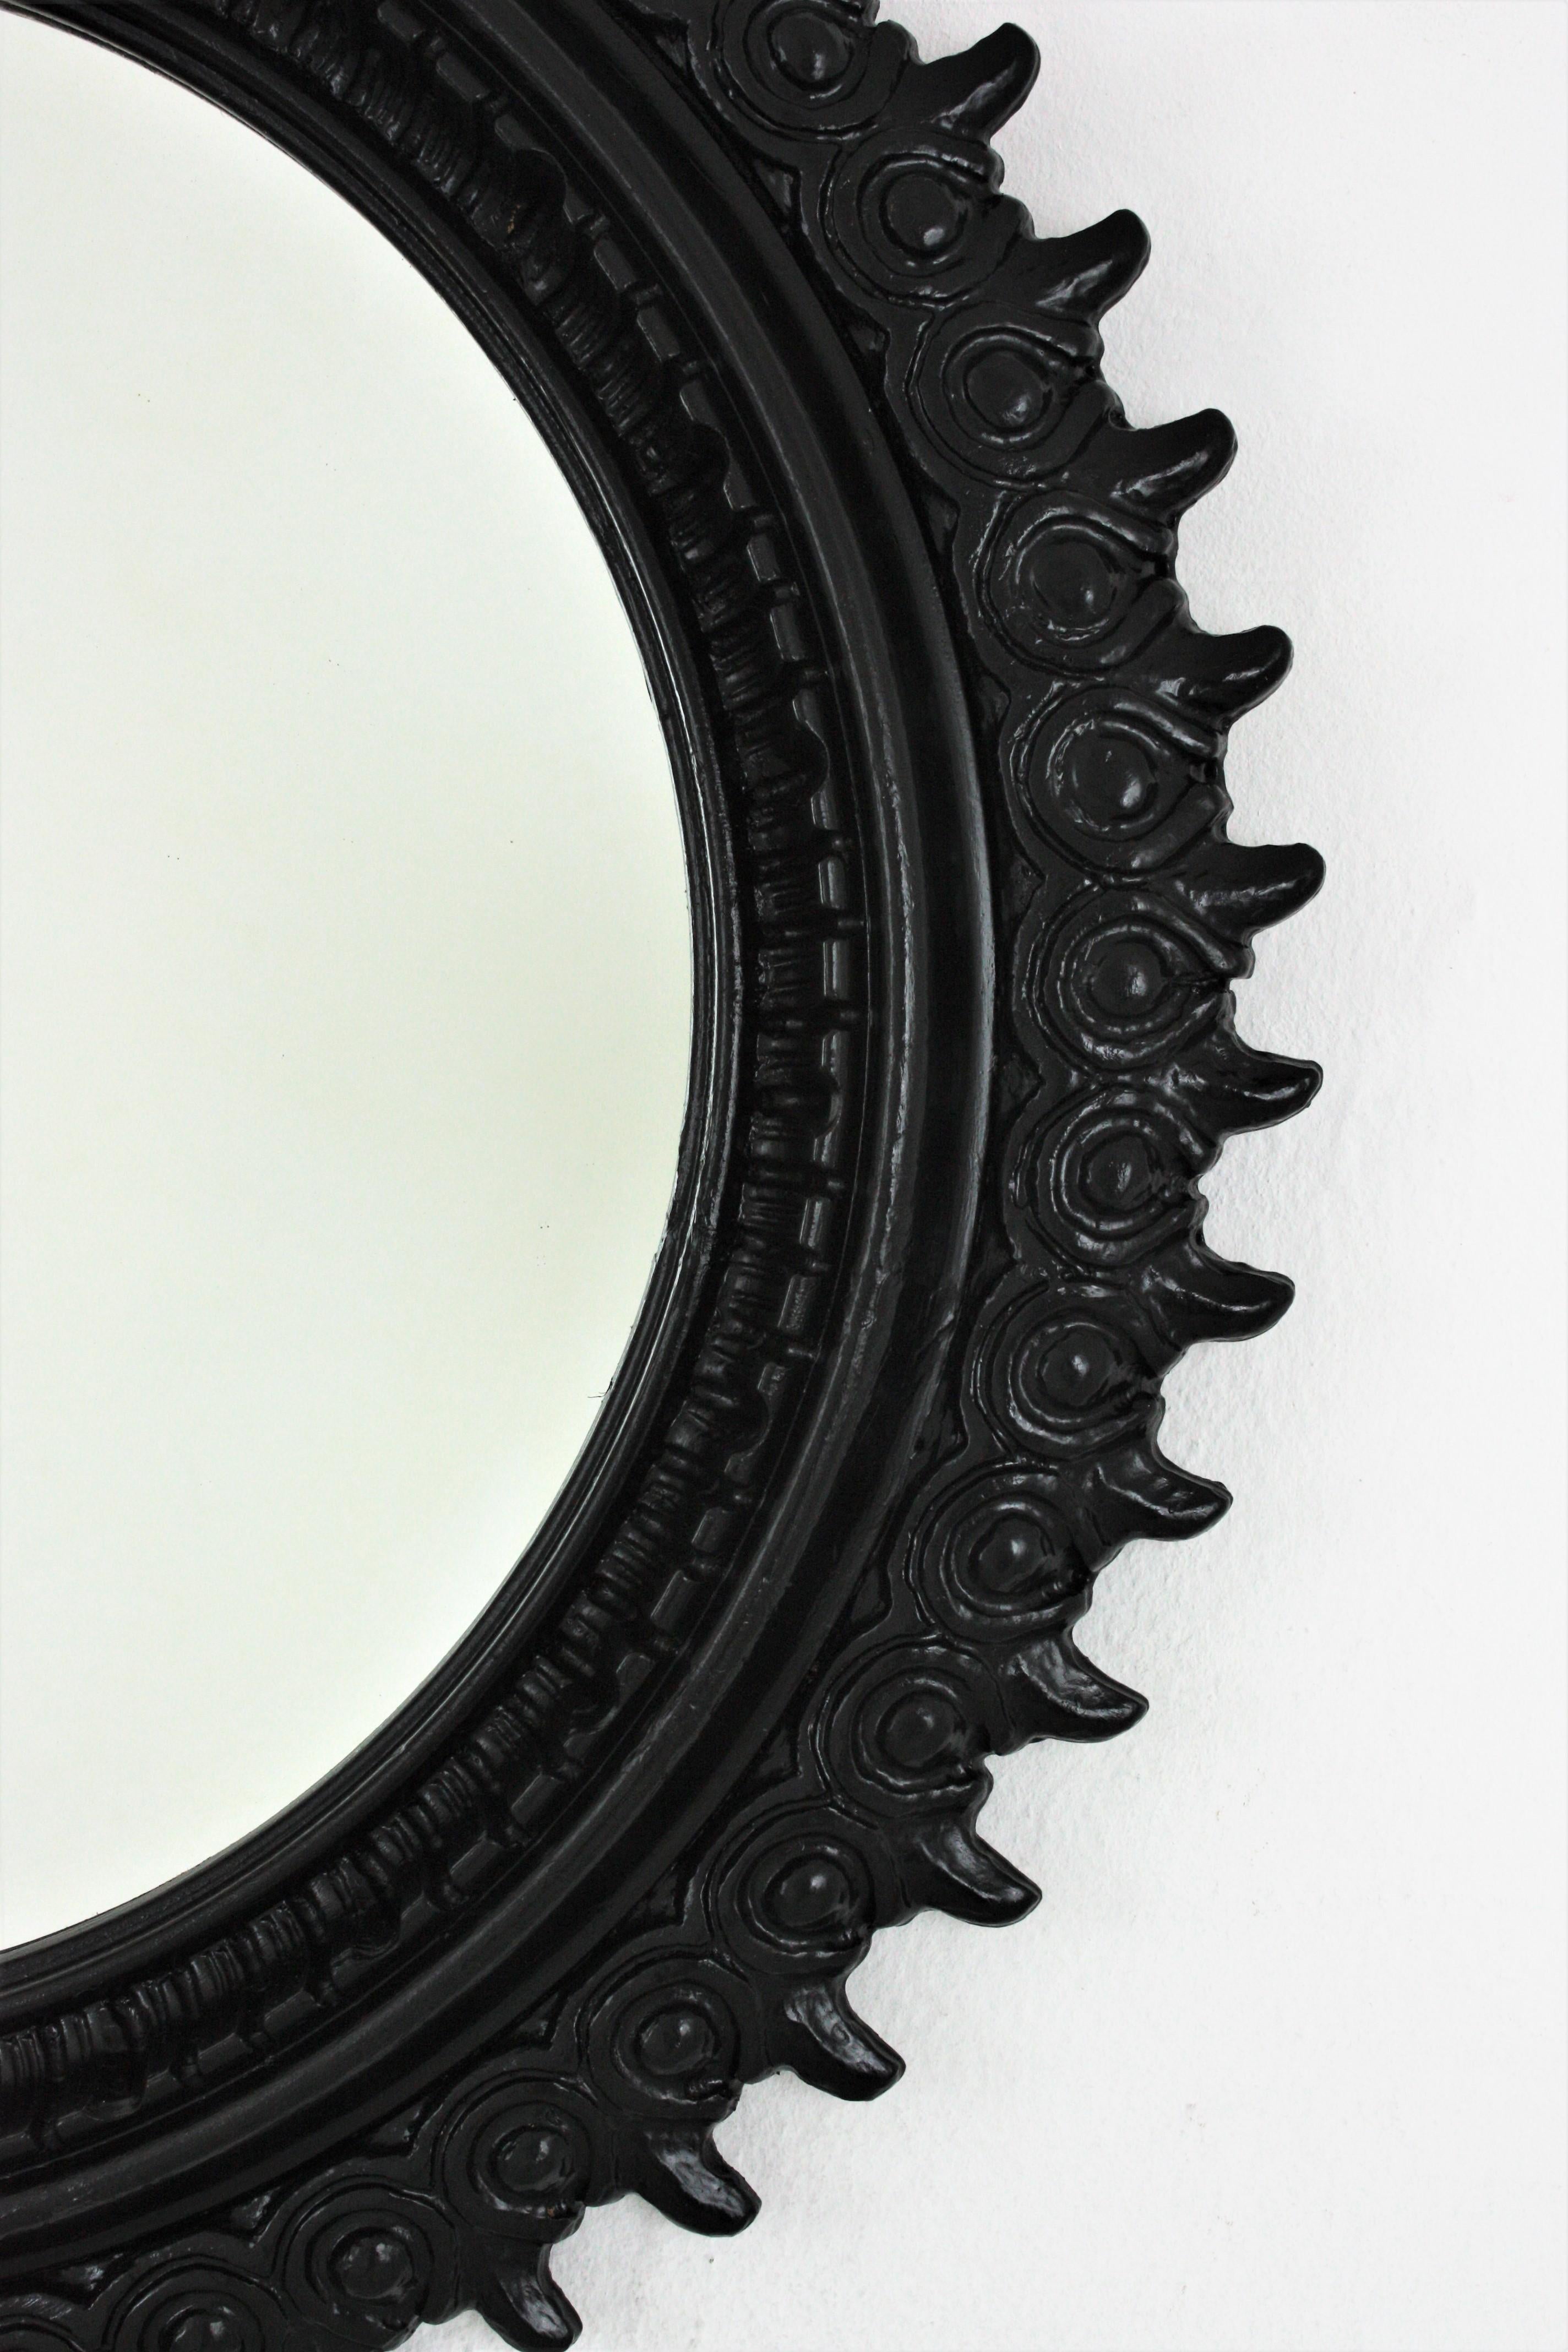 Sunburst Mirror in Carved Wood and Black Patina by Francisco Hurtado For Sale 2